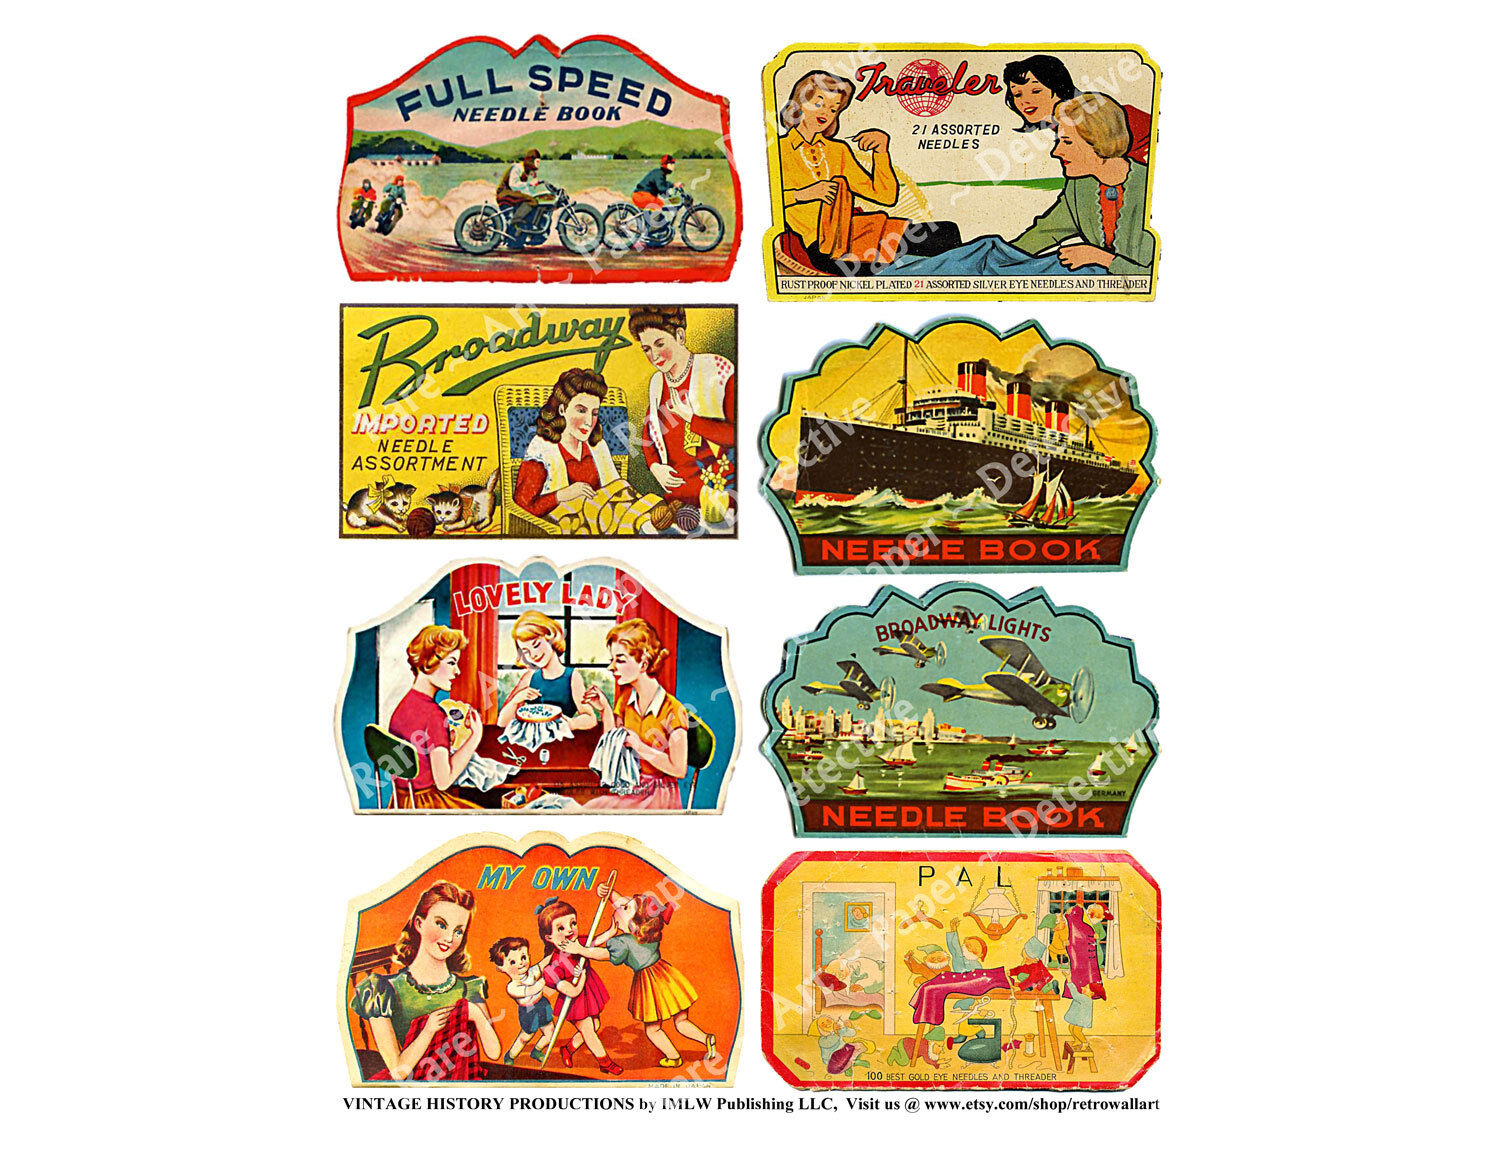 Needle Book Sewing Labels, 1 Sticker Sheet, Vintage Advertising Reproductions